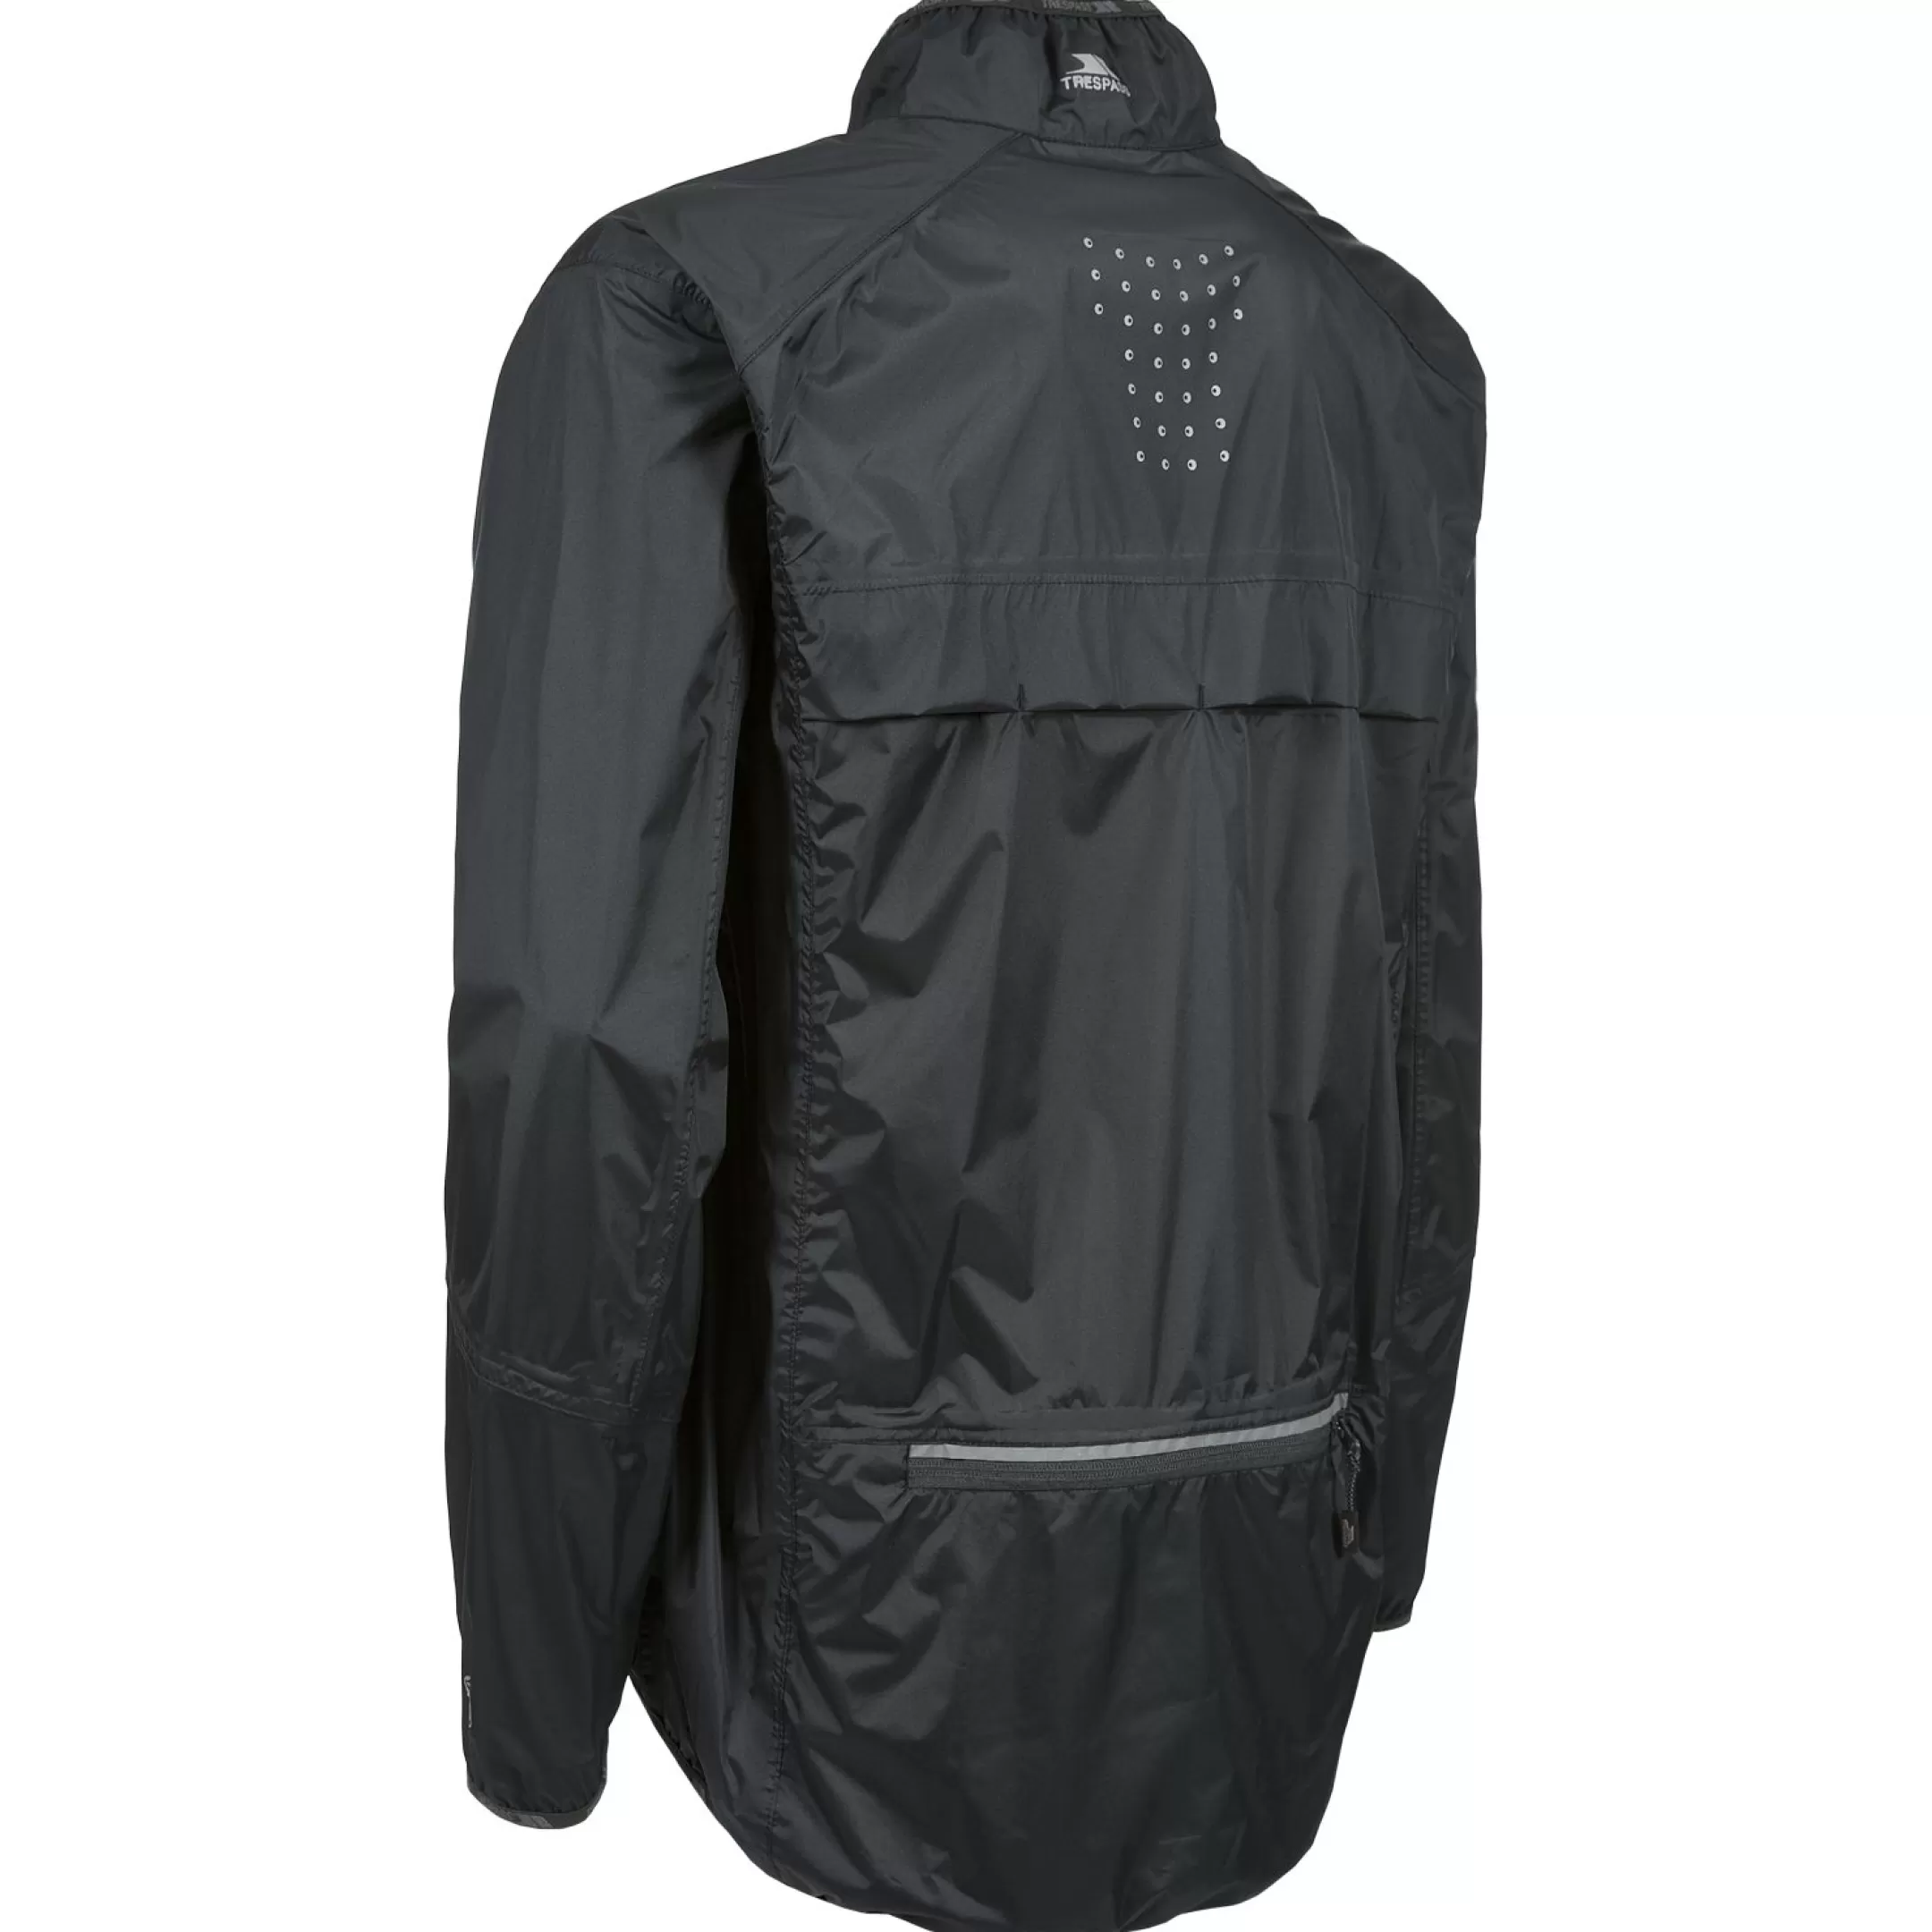 Men's Waterproof Cycling Jacket Grafted | Trespass Flash Sale